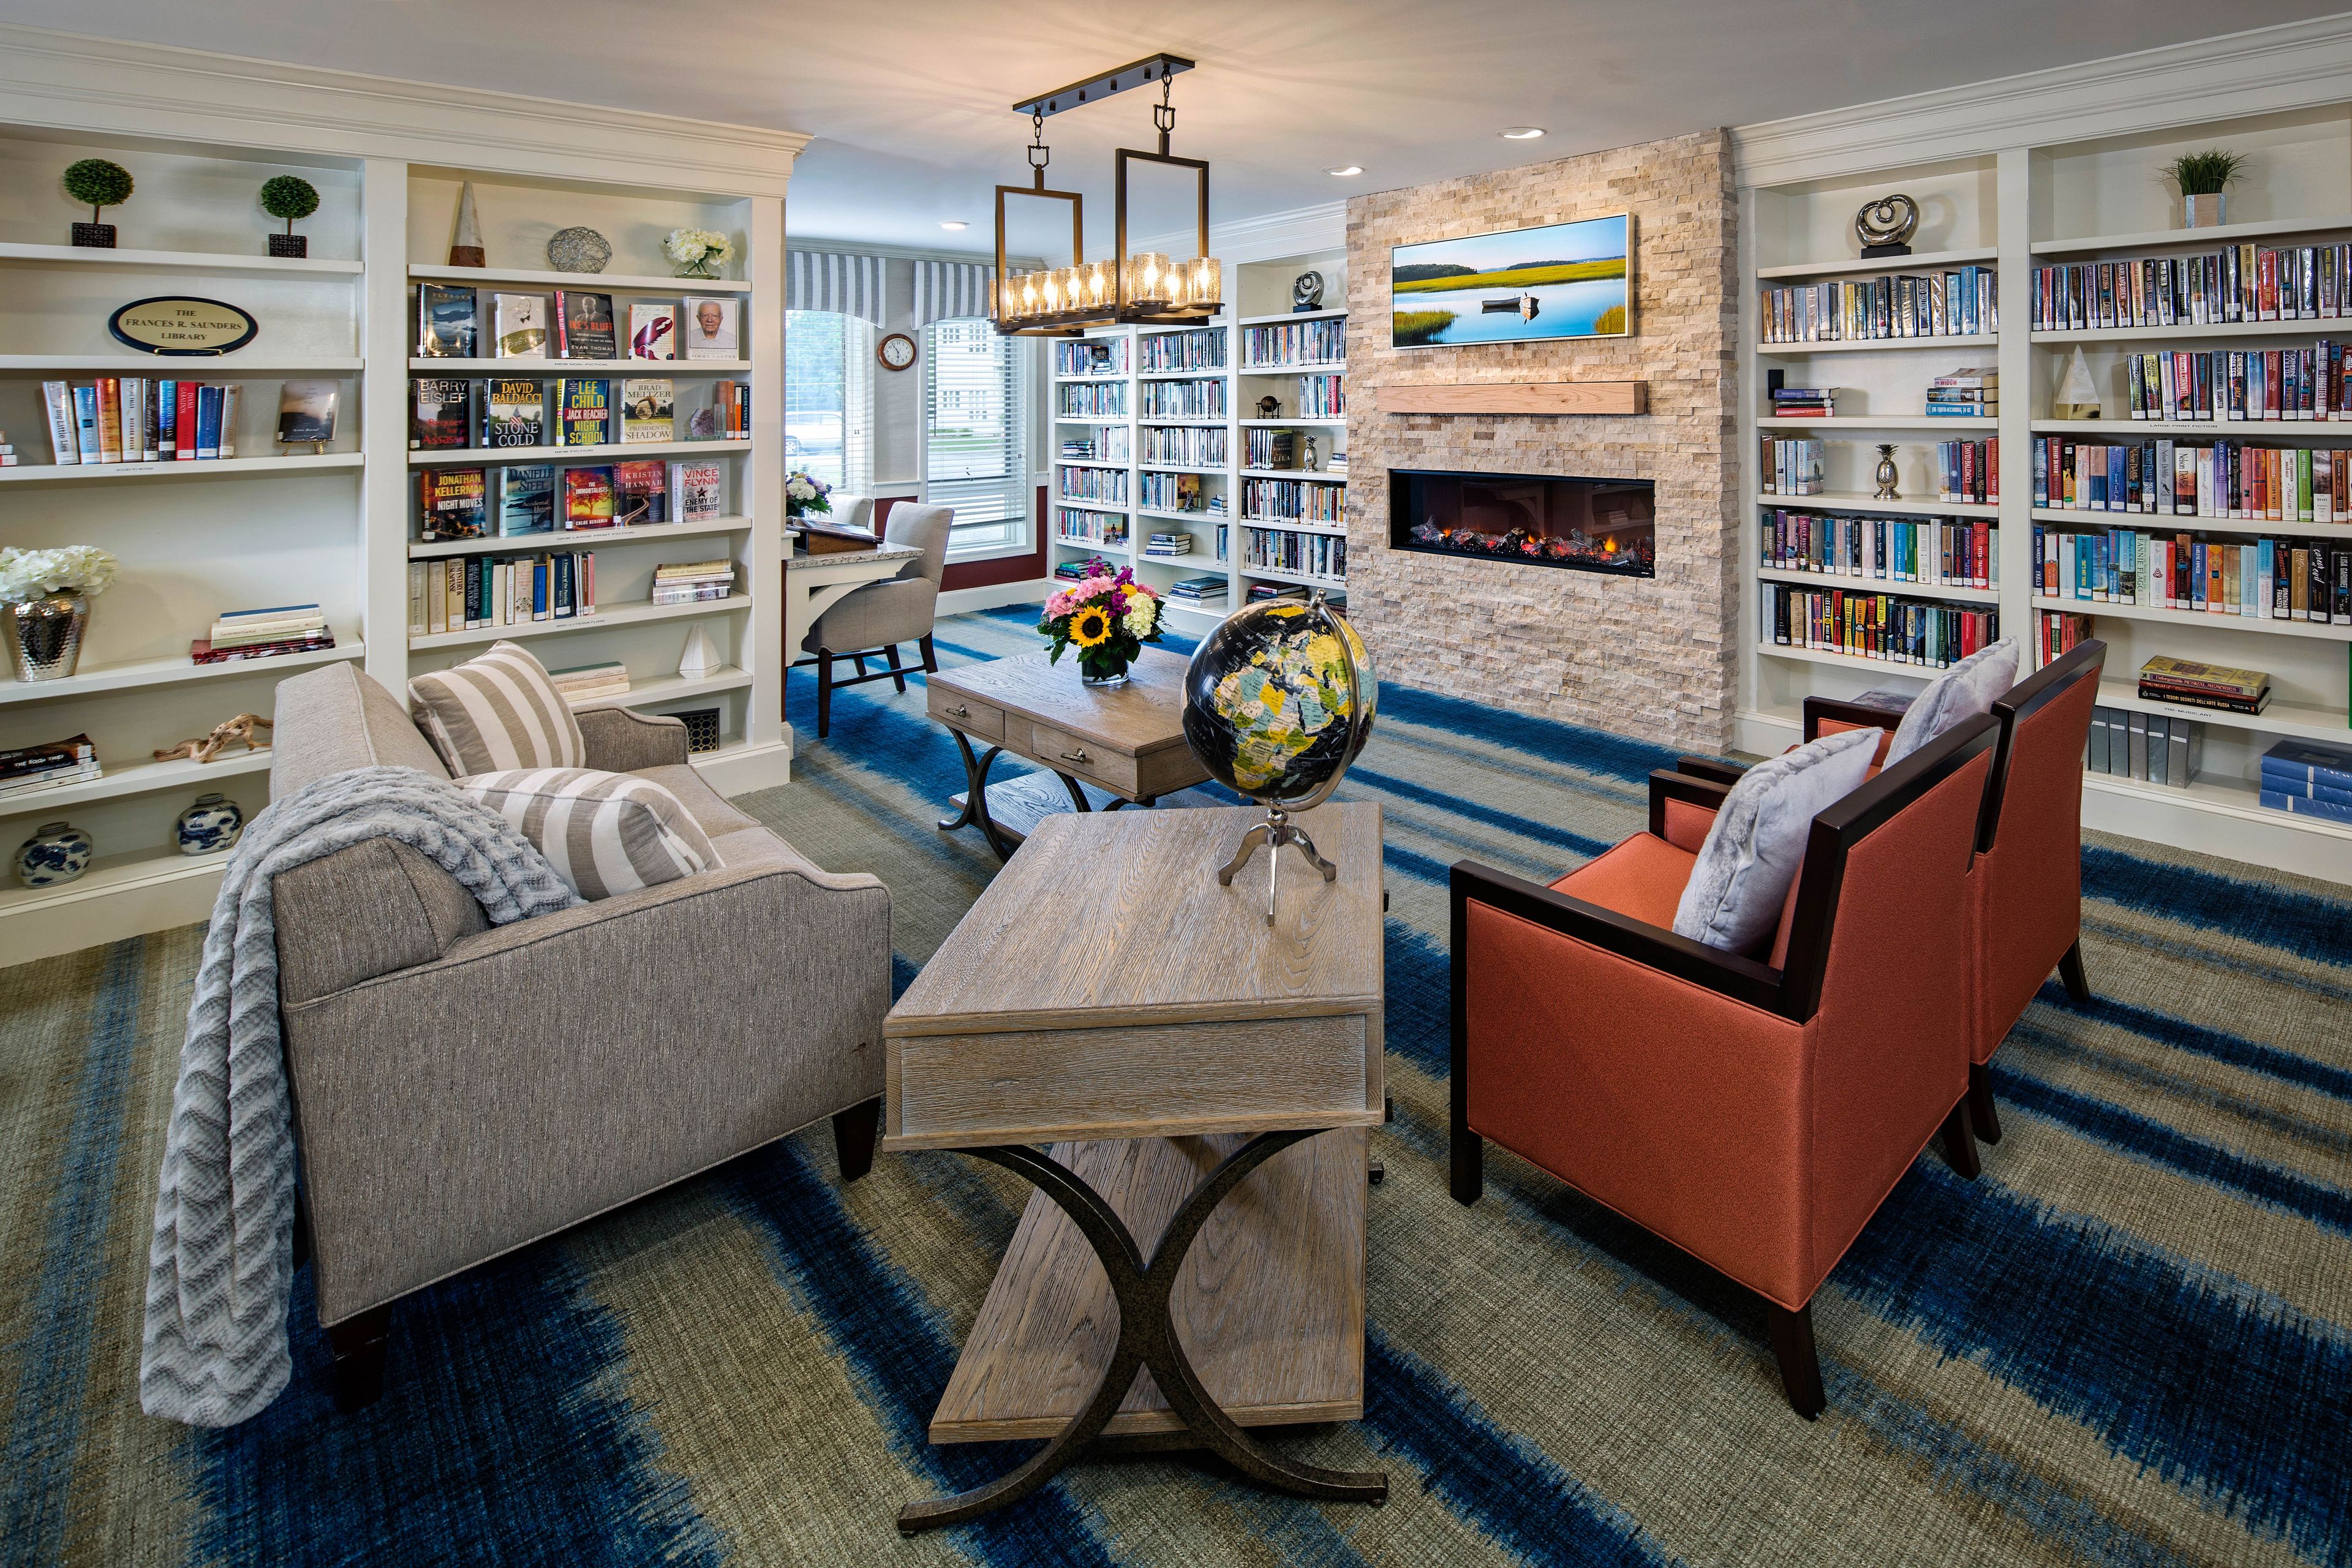 Senior living room at Maplewood at Mayflower Place with cozy furniture and library.